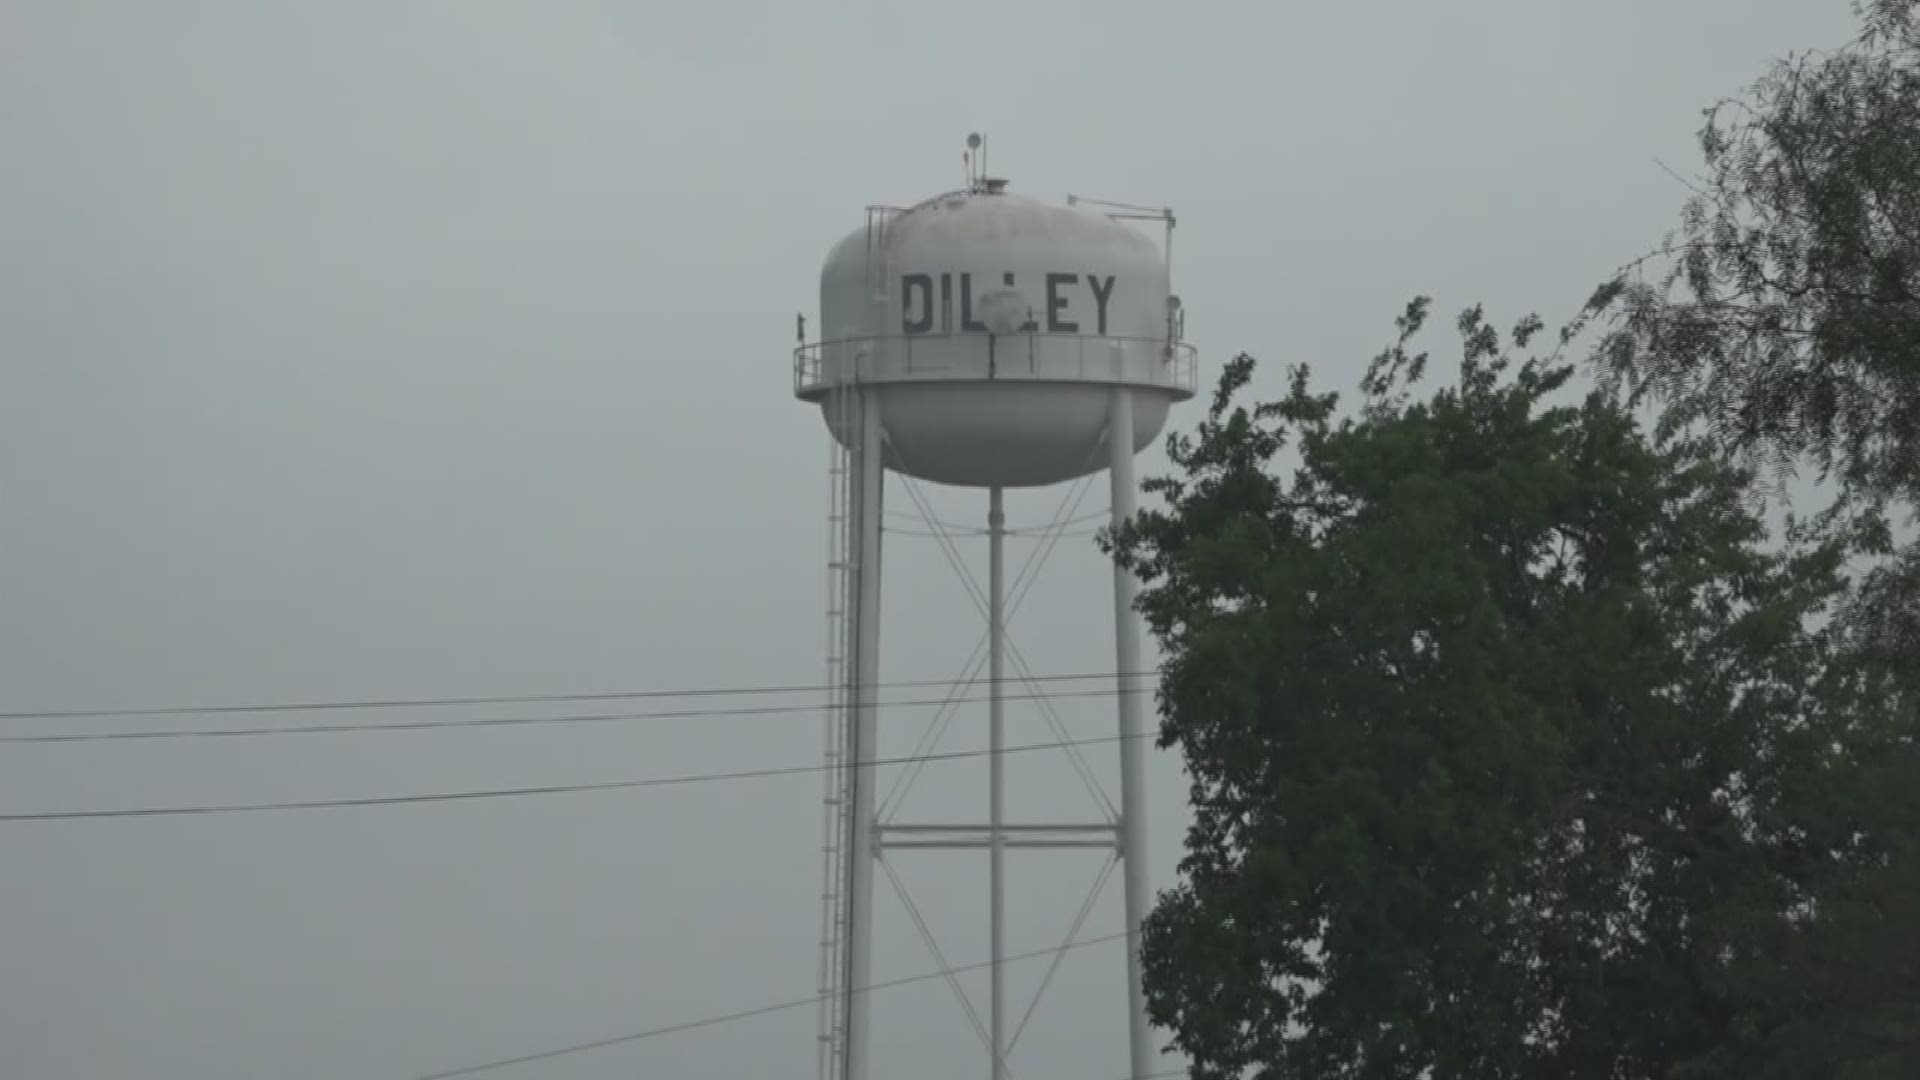 The Texas Commission on Environmental Quality recently found several violations when it looked into the City of Dilley's water facilities. 